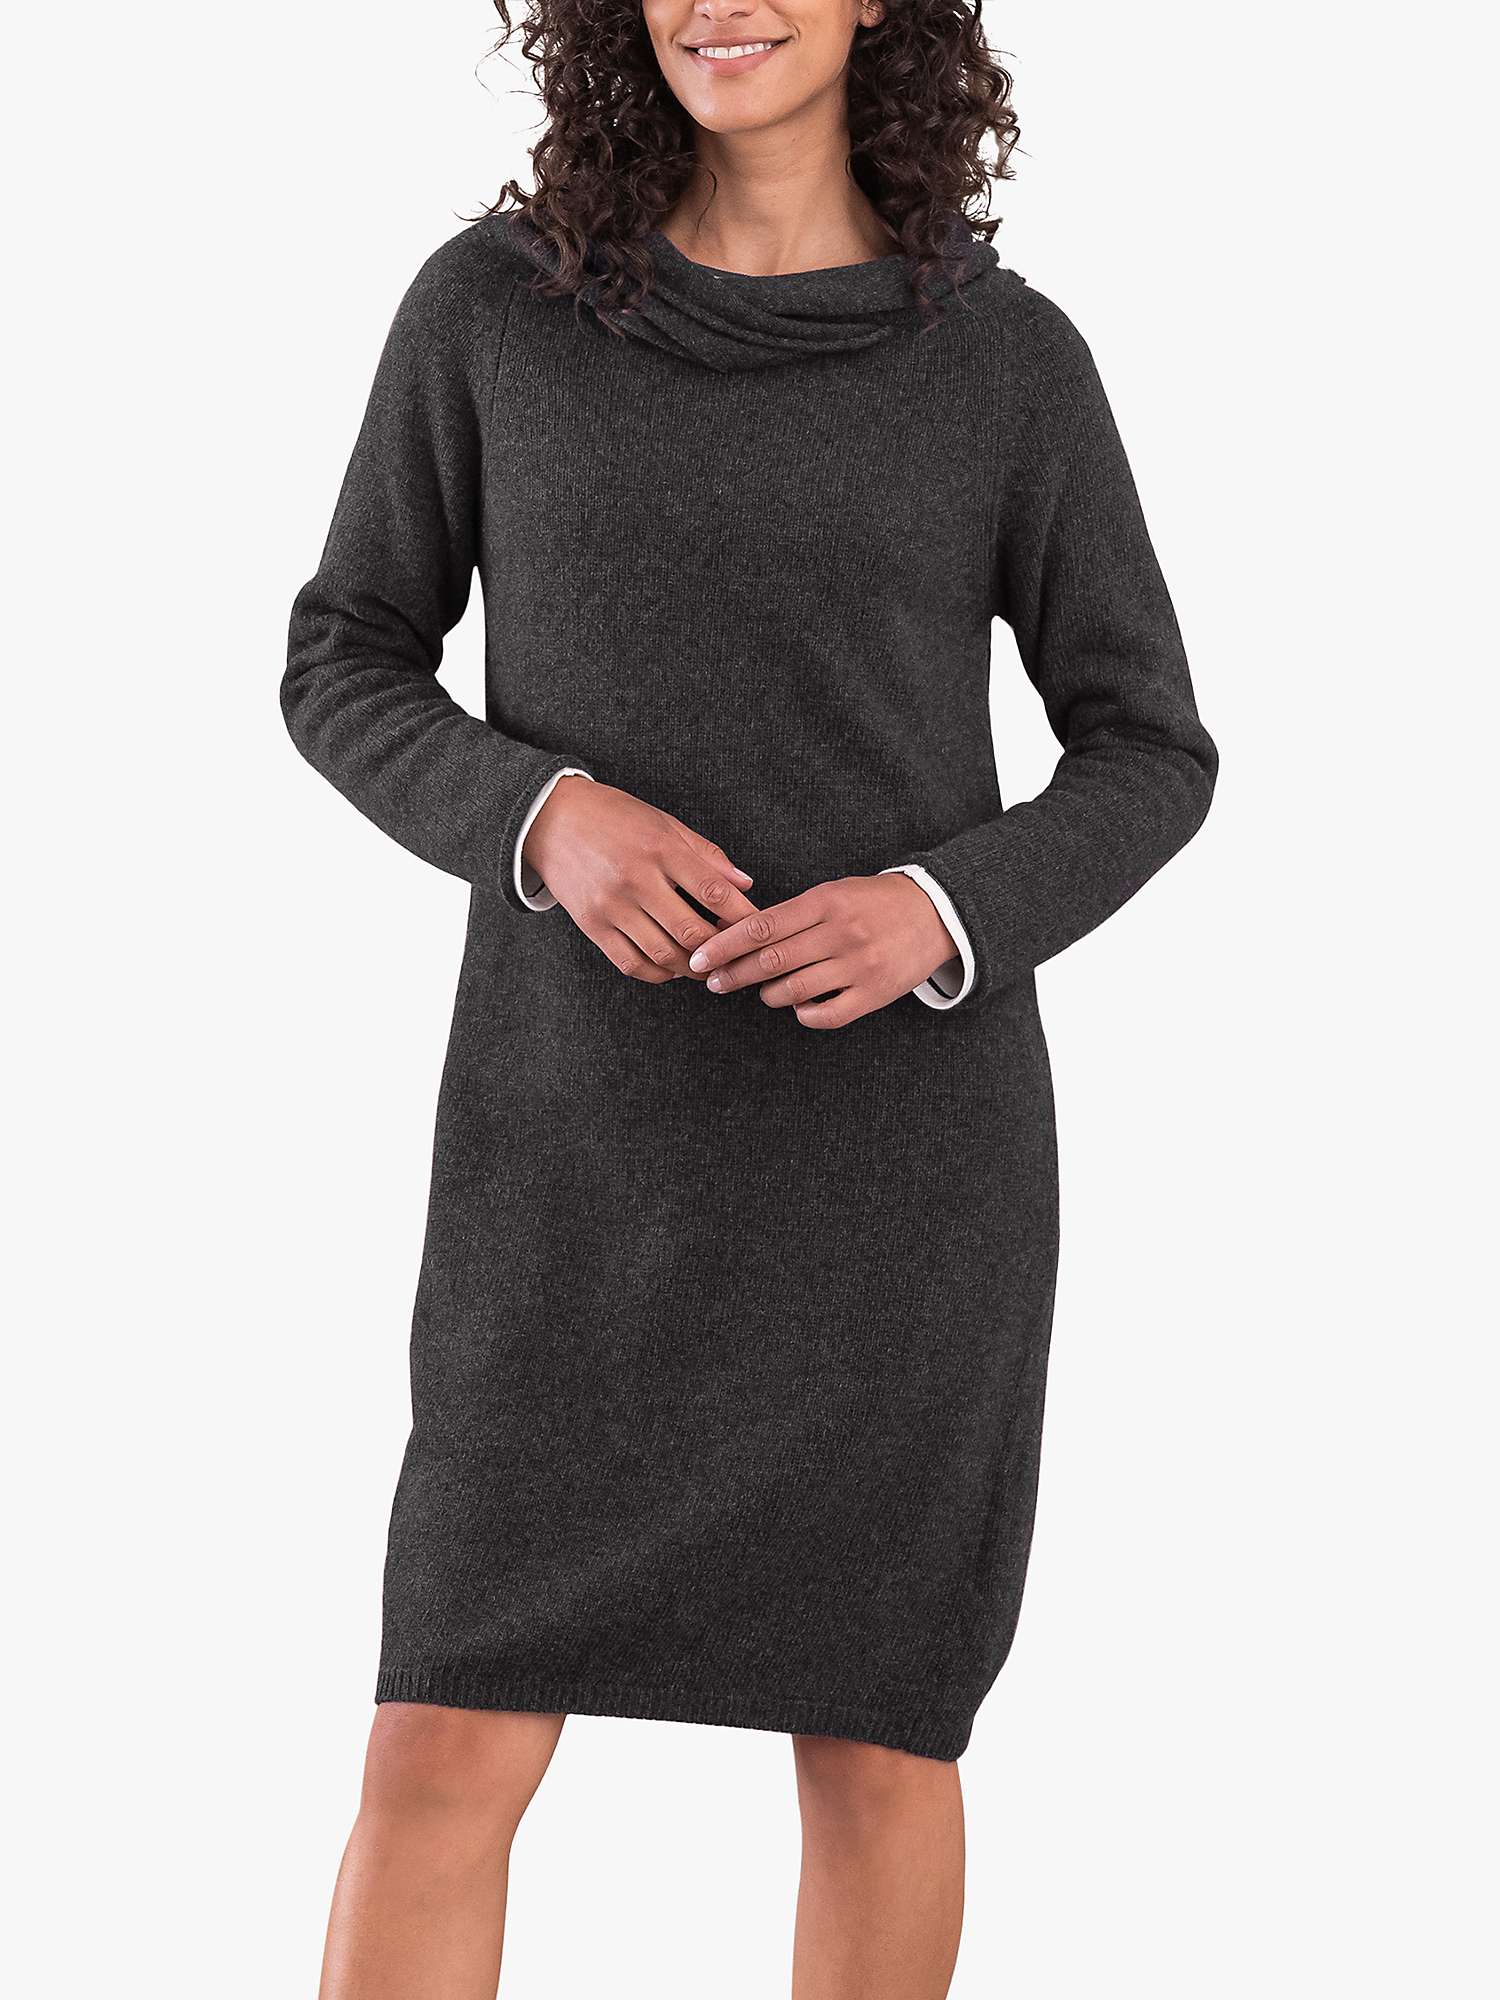 Buy Celtic & Co. Cowl Neck Lambswool Jumper Dress, Charcoal Online at johnlewis.com